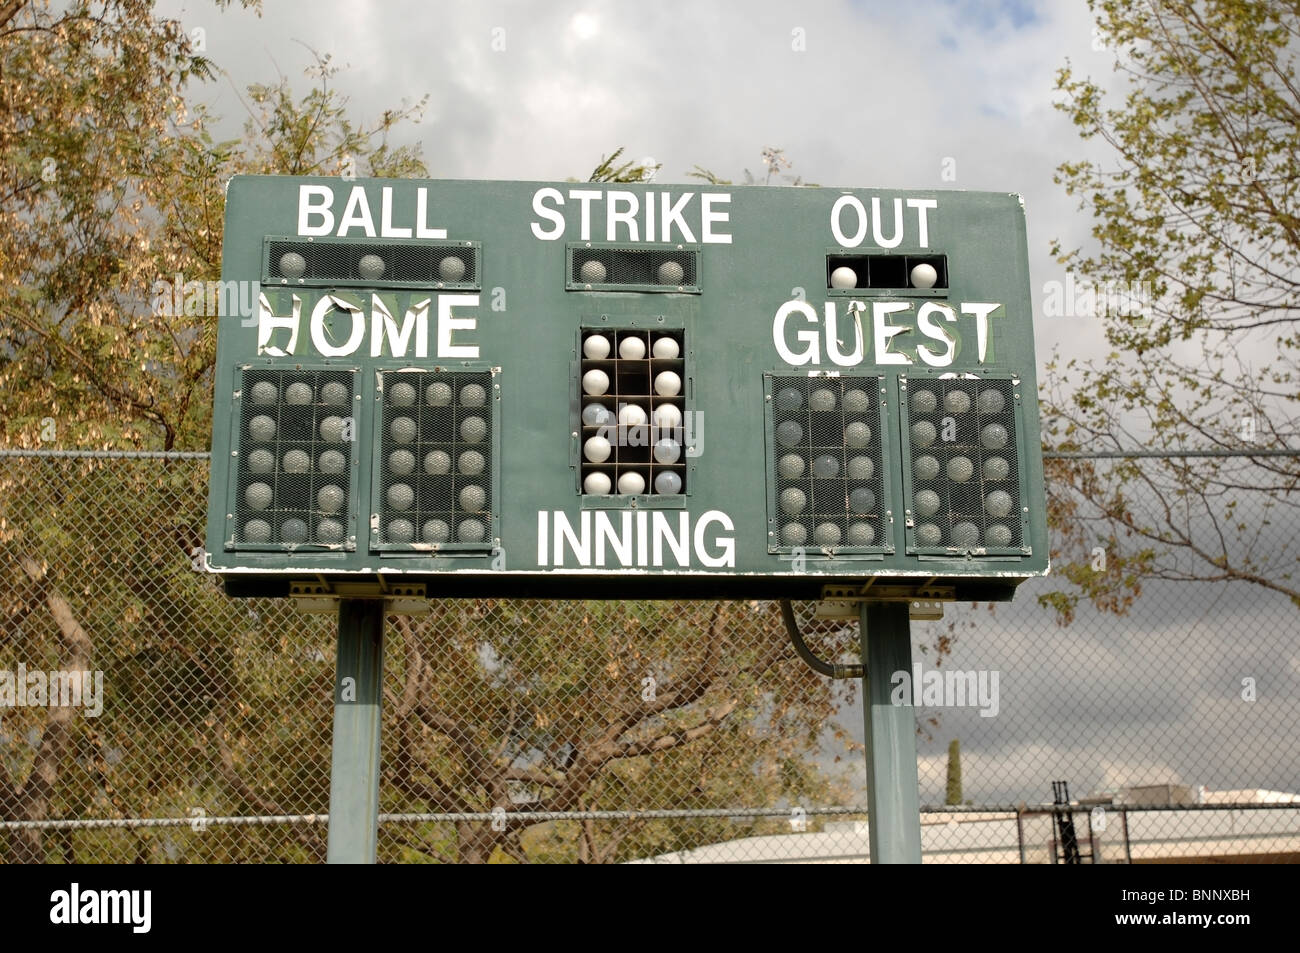 Scoreboard for a baseball field showing both age and use. Stock Photo